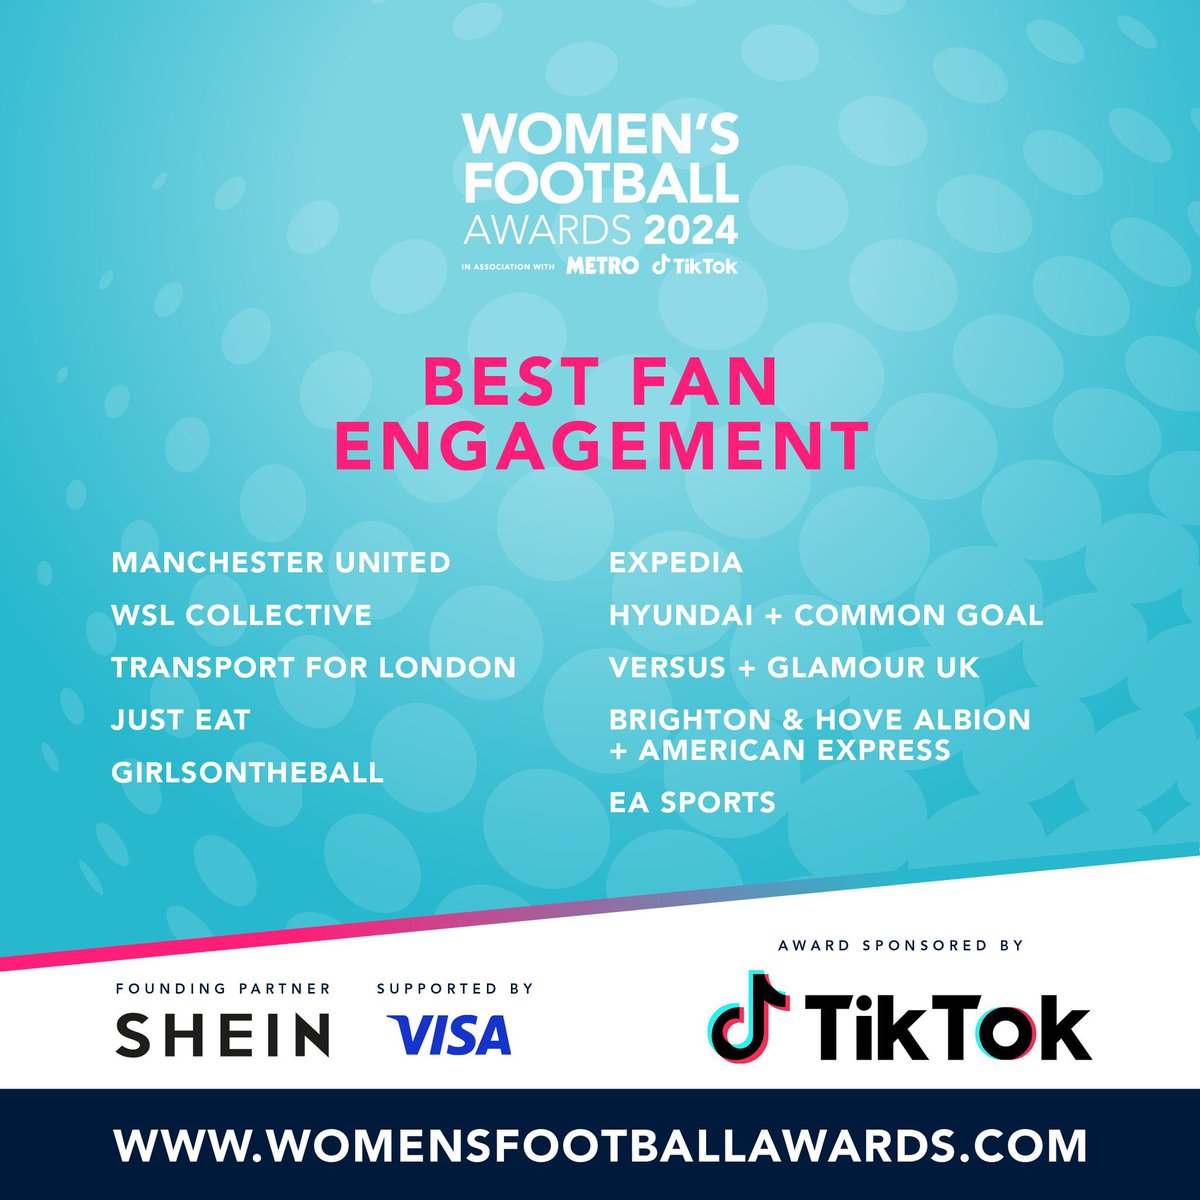 Congratulations to @JillScottJS8 , @emmahayes1, @rach_brown1 and @GirlsontheBall who have all been nominated for an award at the Women’s Football Awards 👏